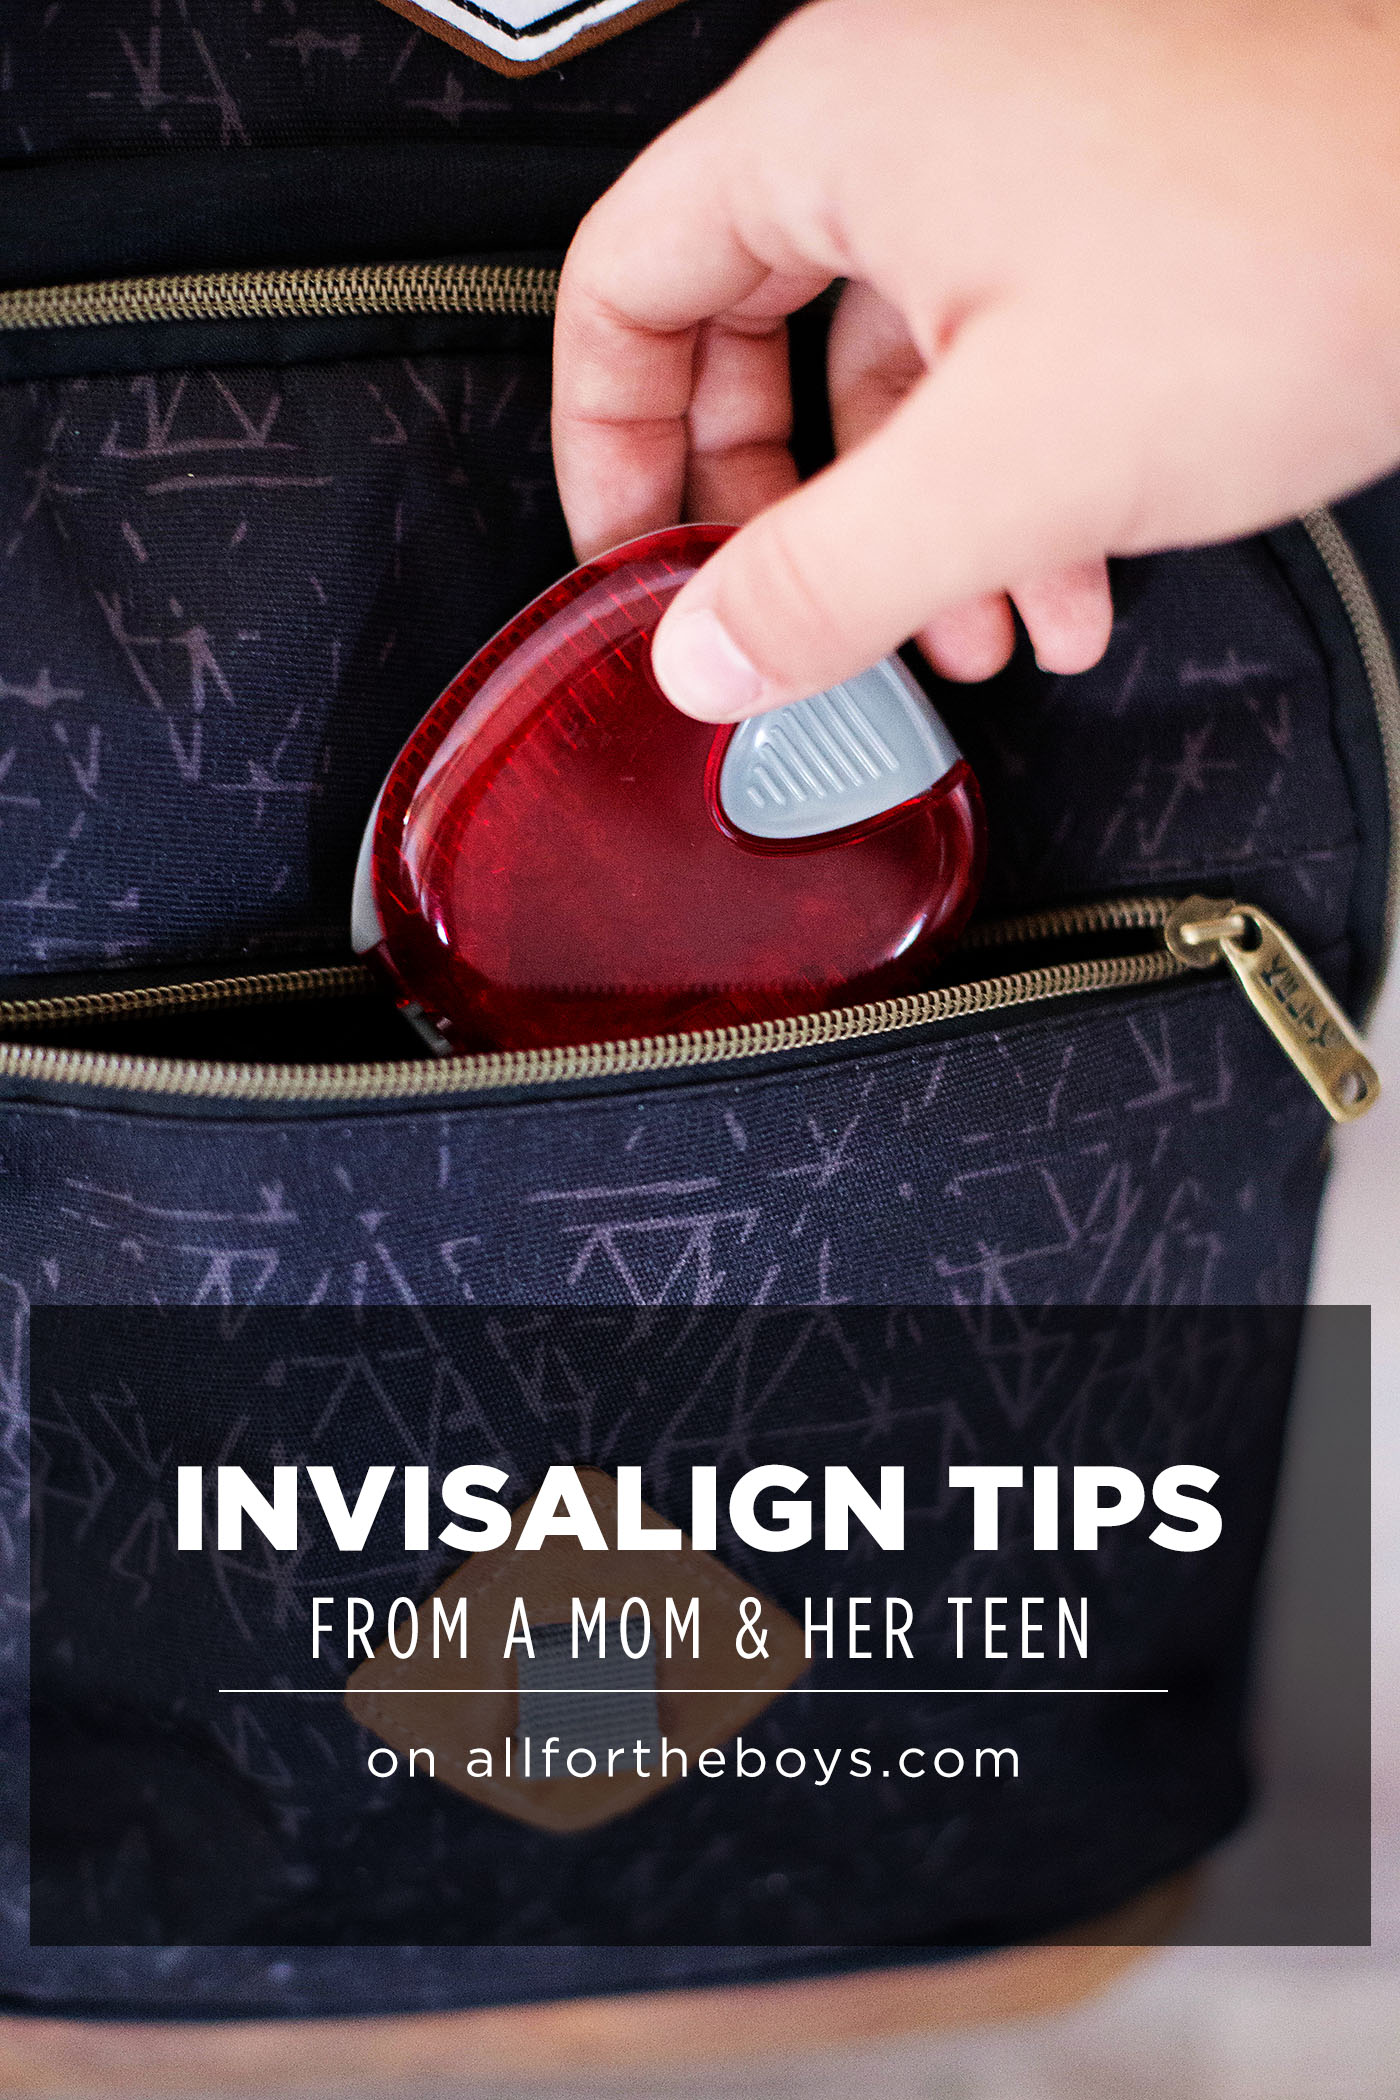 Tips for Invisalign® Aligner users from a mom and her teen